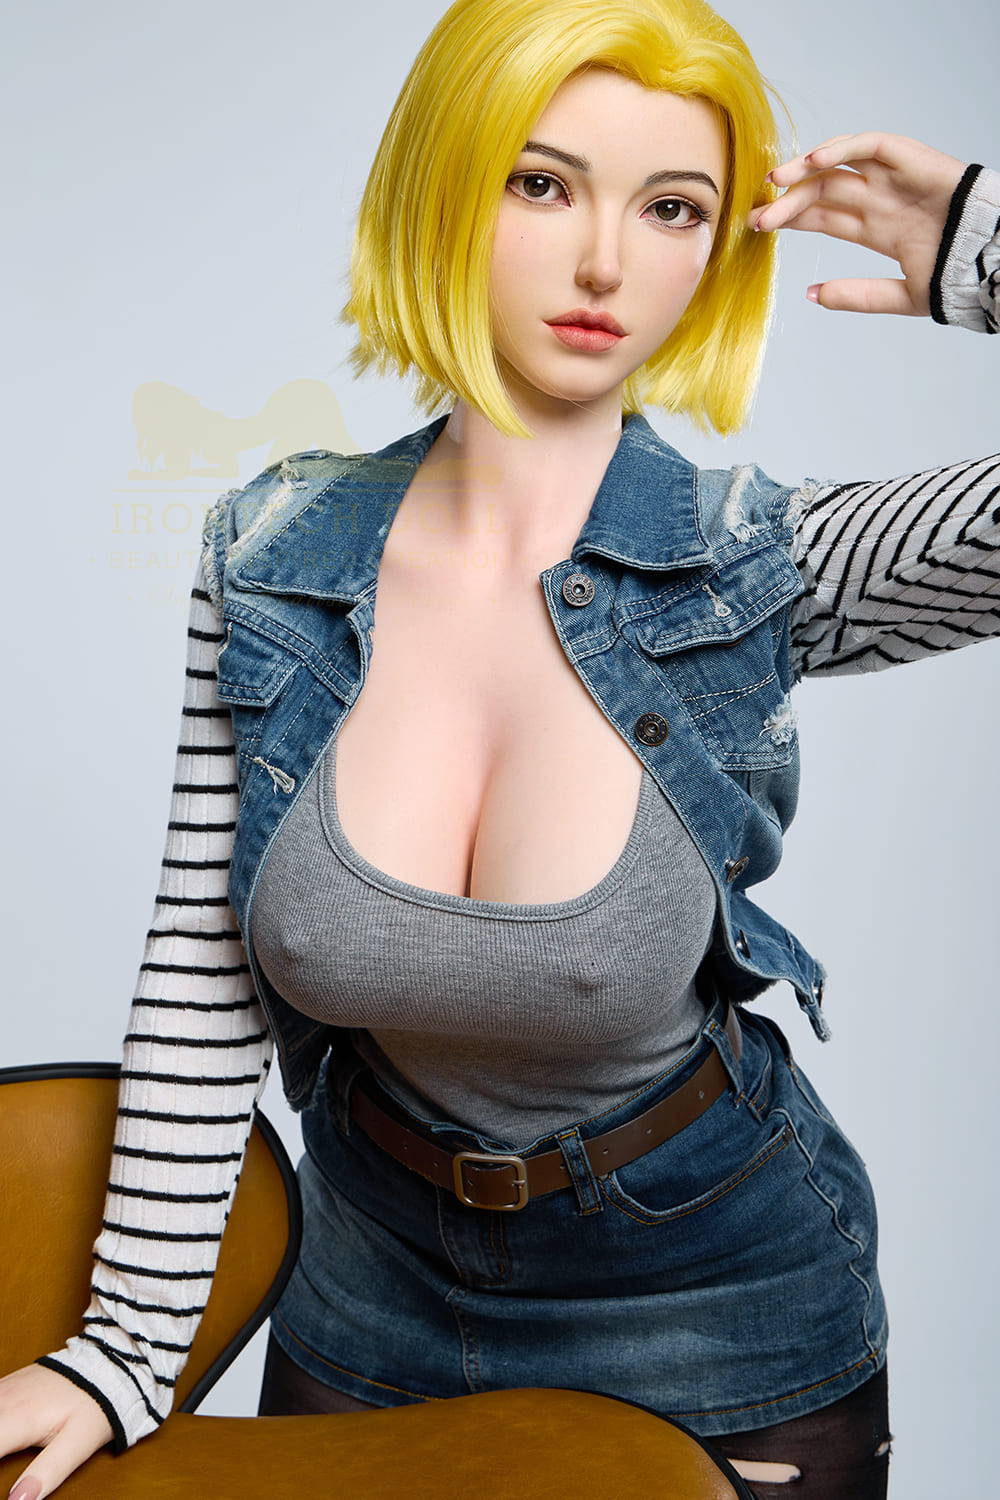 5ft3 / 159cm G-Cup Curvy Body  Silicone Japanese Sex Doll - Irontech Doll Jill